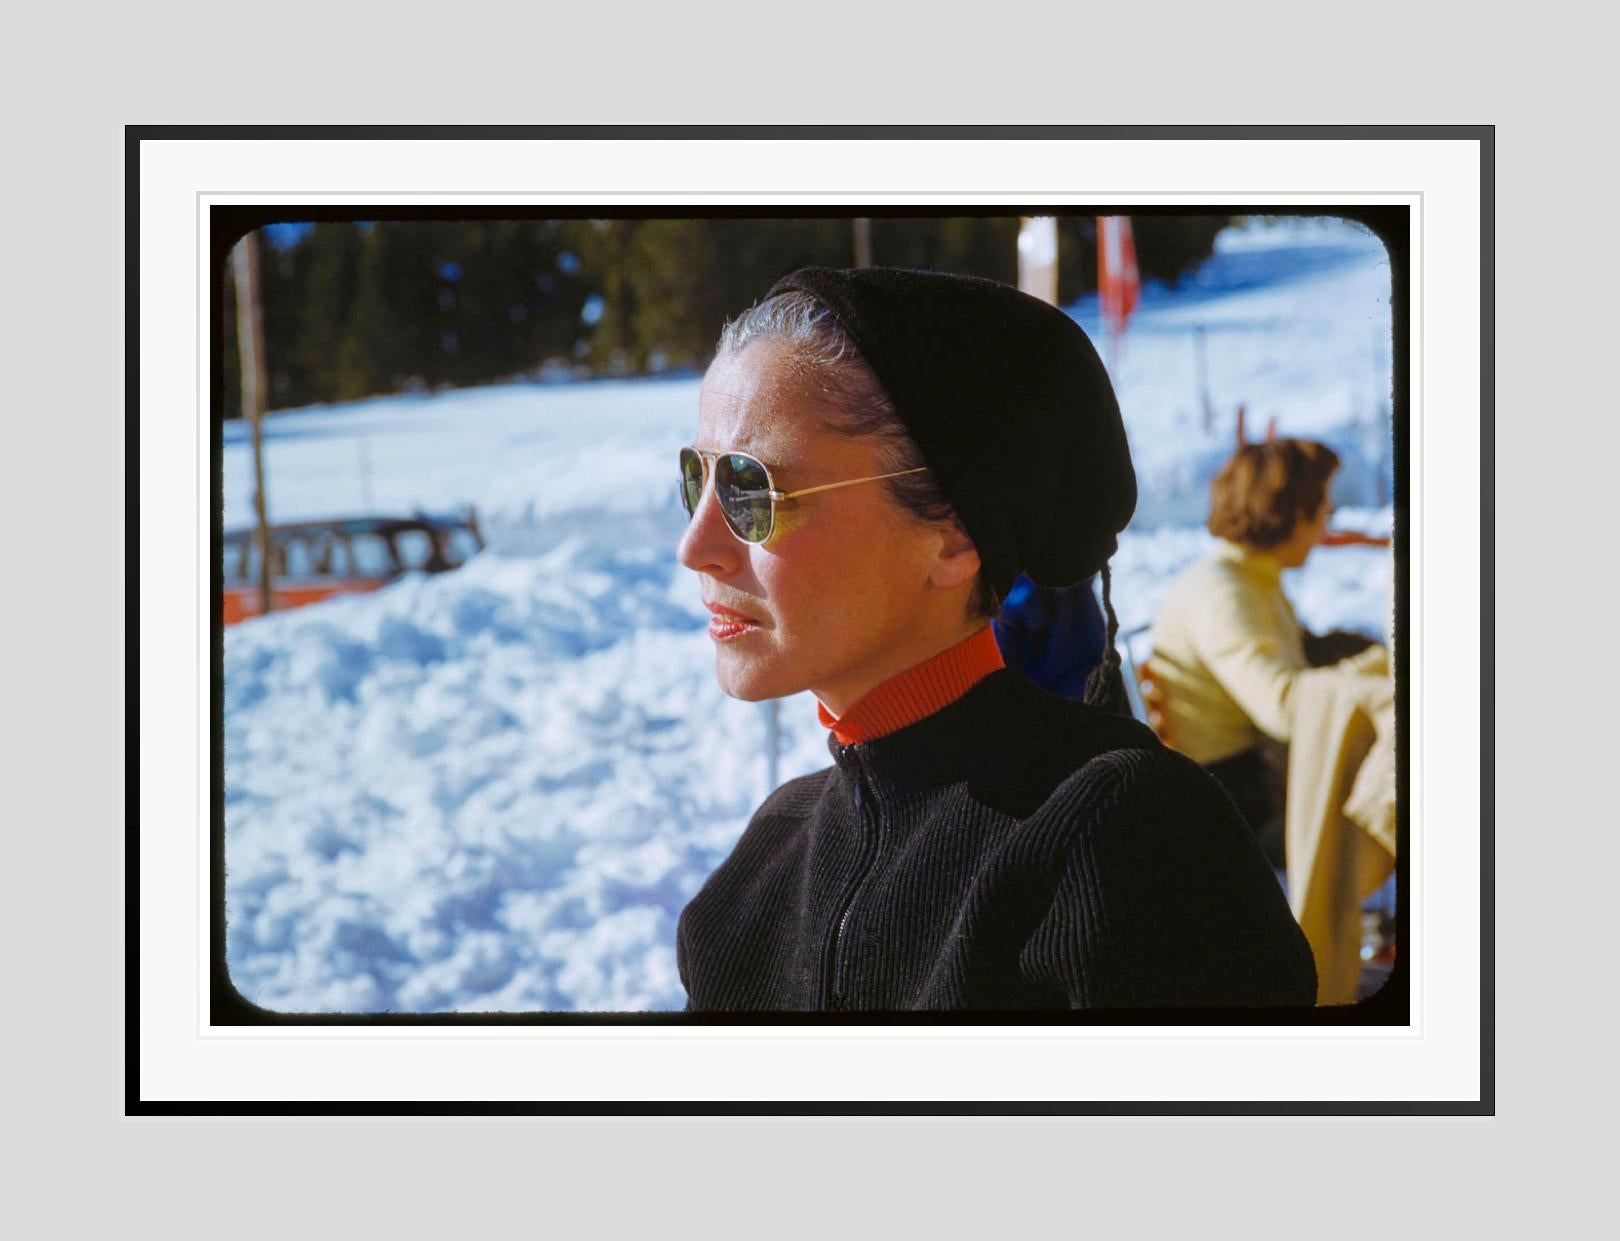 Winter Cool 

1955

A stylish female apres-skiwear, Klosters, Switzerland

by Toni Frissell

48 x 72 “ / 121 x 182 cm - paper size
Archival pigment print
unframed 
(framing available see examples - please enquire) 

Limited Signature Stamped Edition